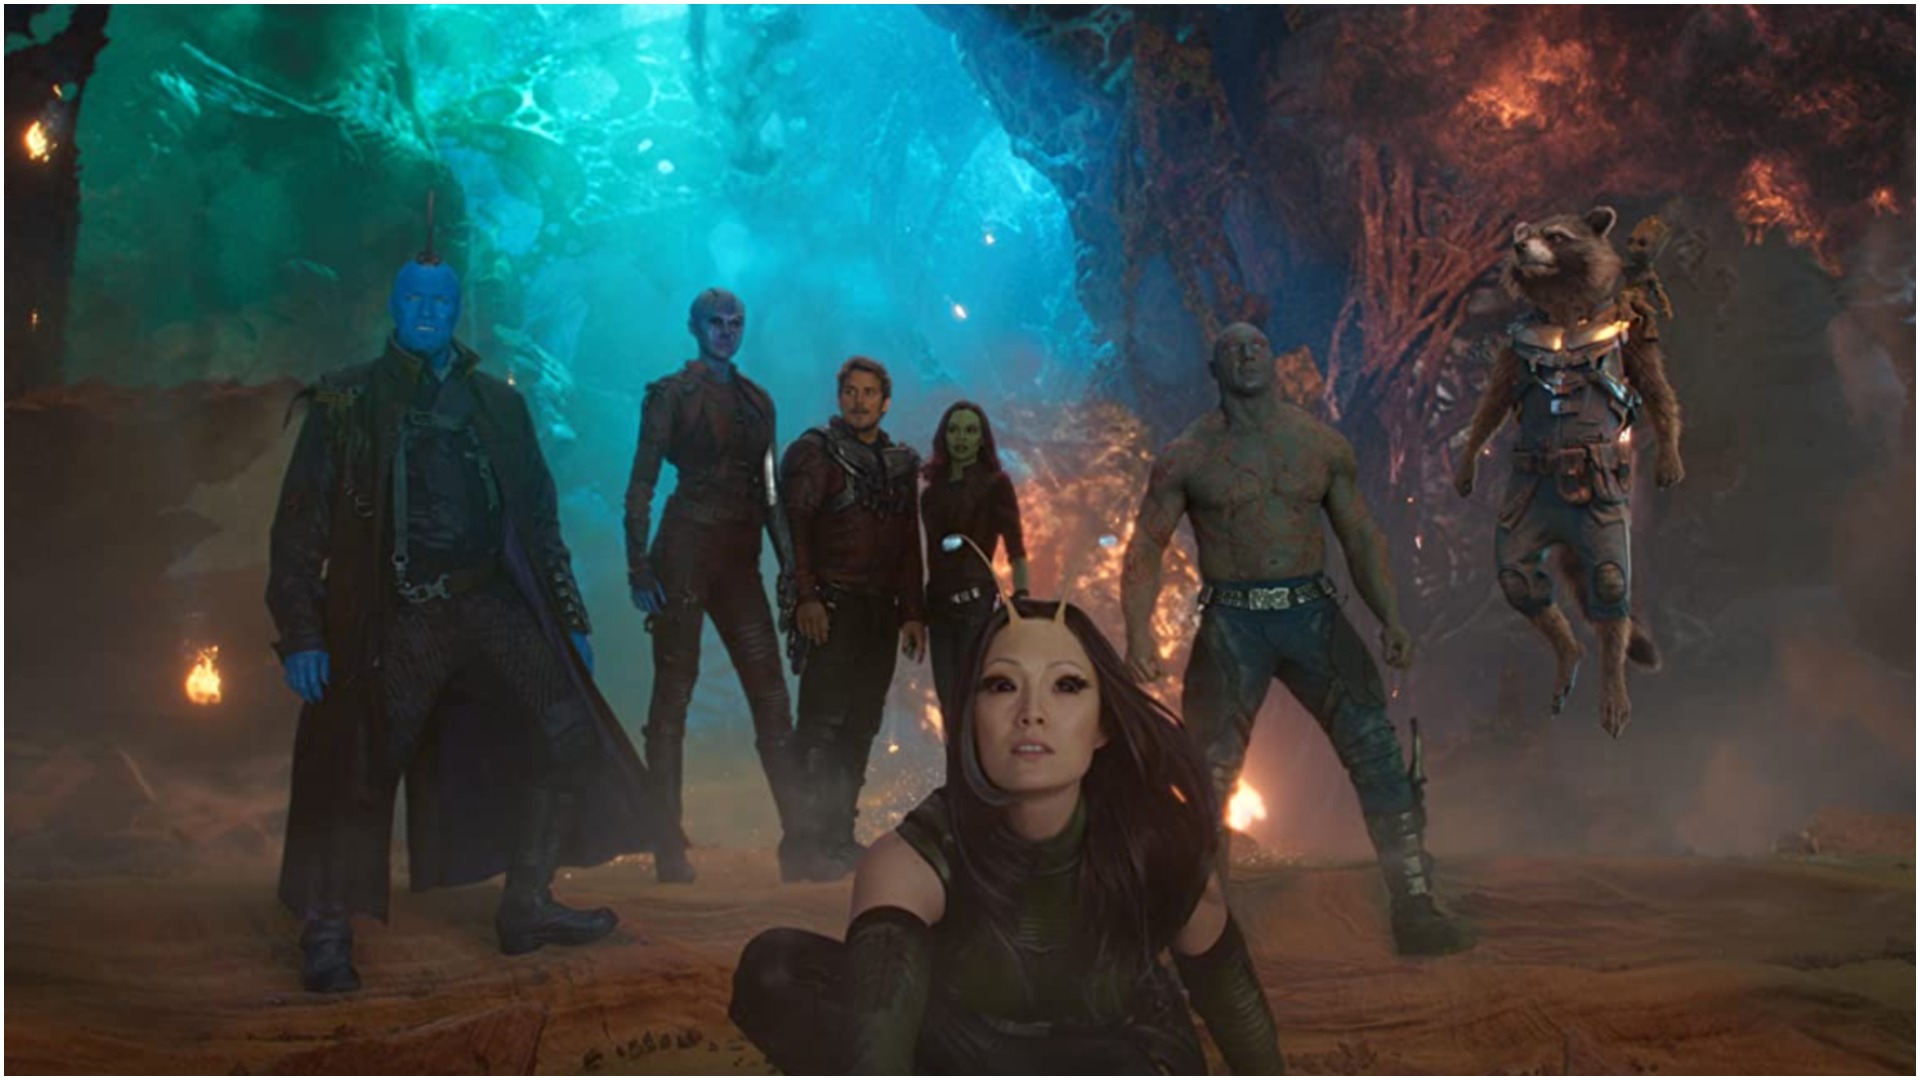 James Gunn says Guardians of the Galaxy 3 will have cameos for “true” fans